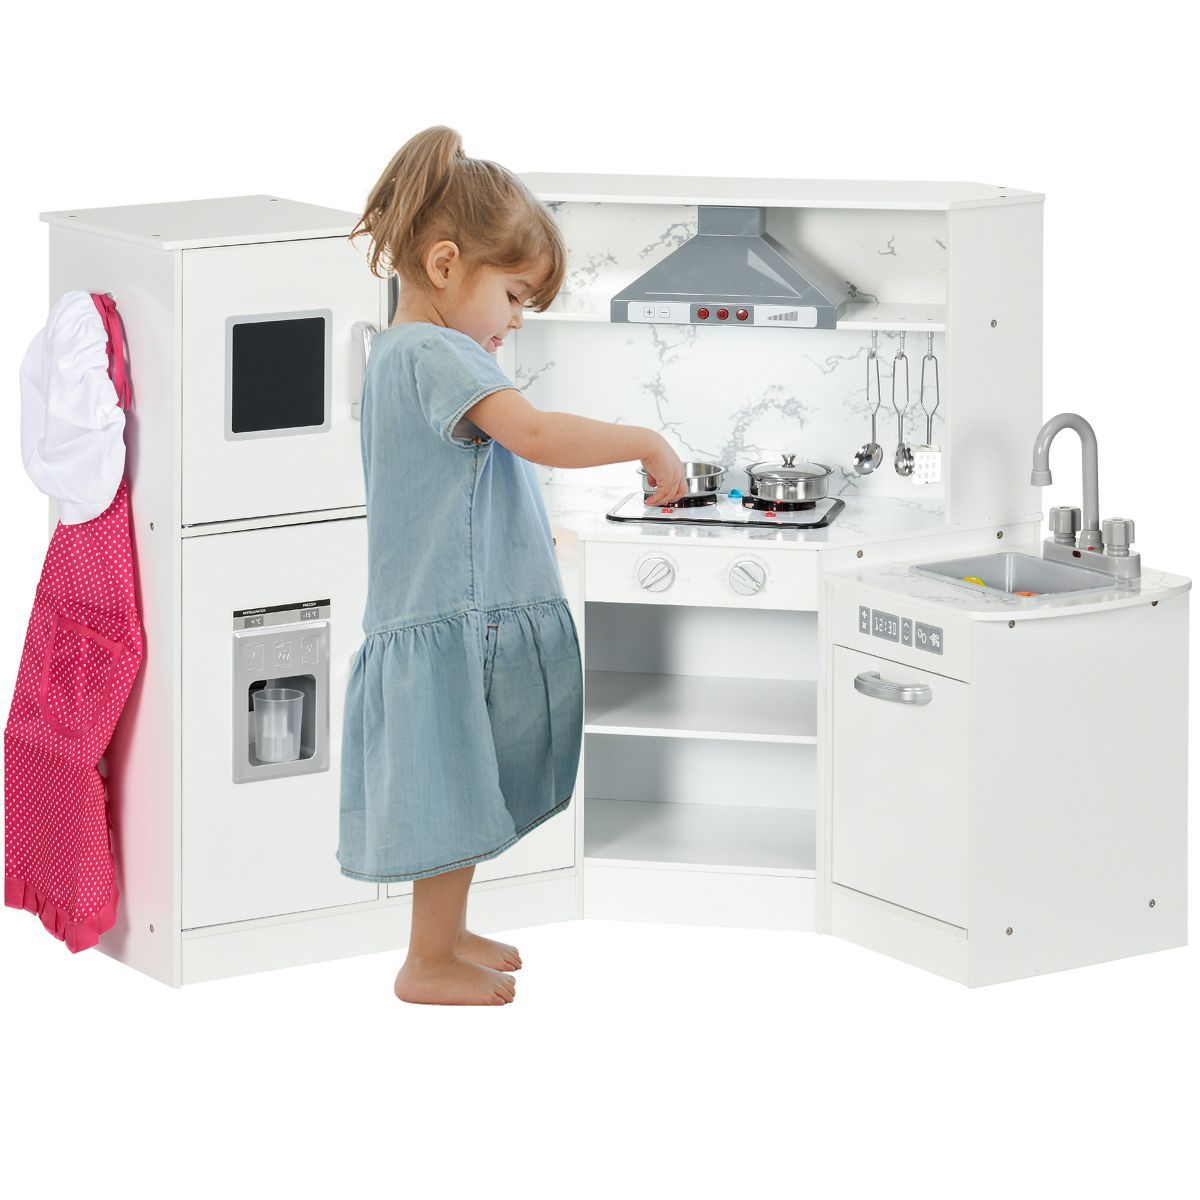 Qaba Play Kitchen Set for Kids with Lights Sounds, Apron and Chef Hat, Ice Maker, Utensils, Range... | Target